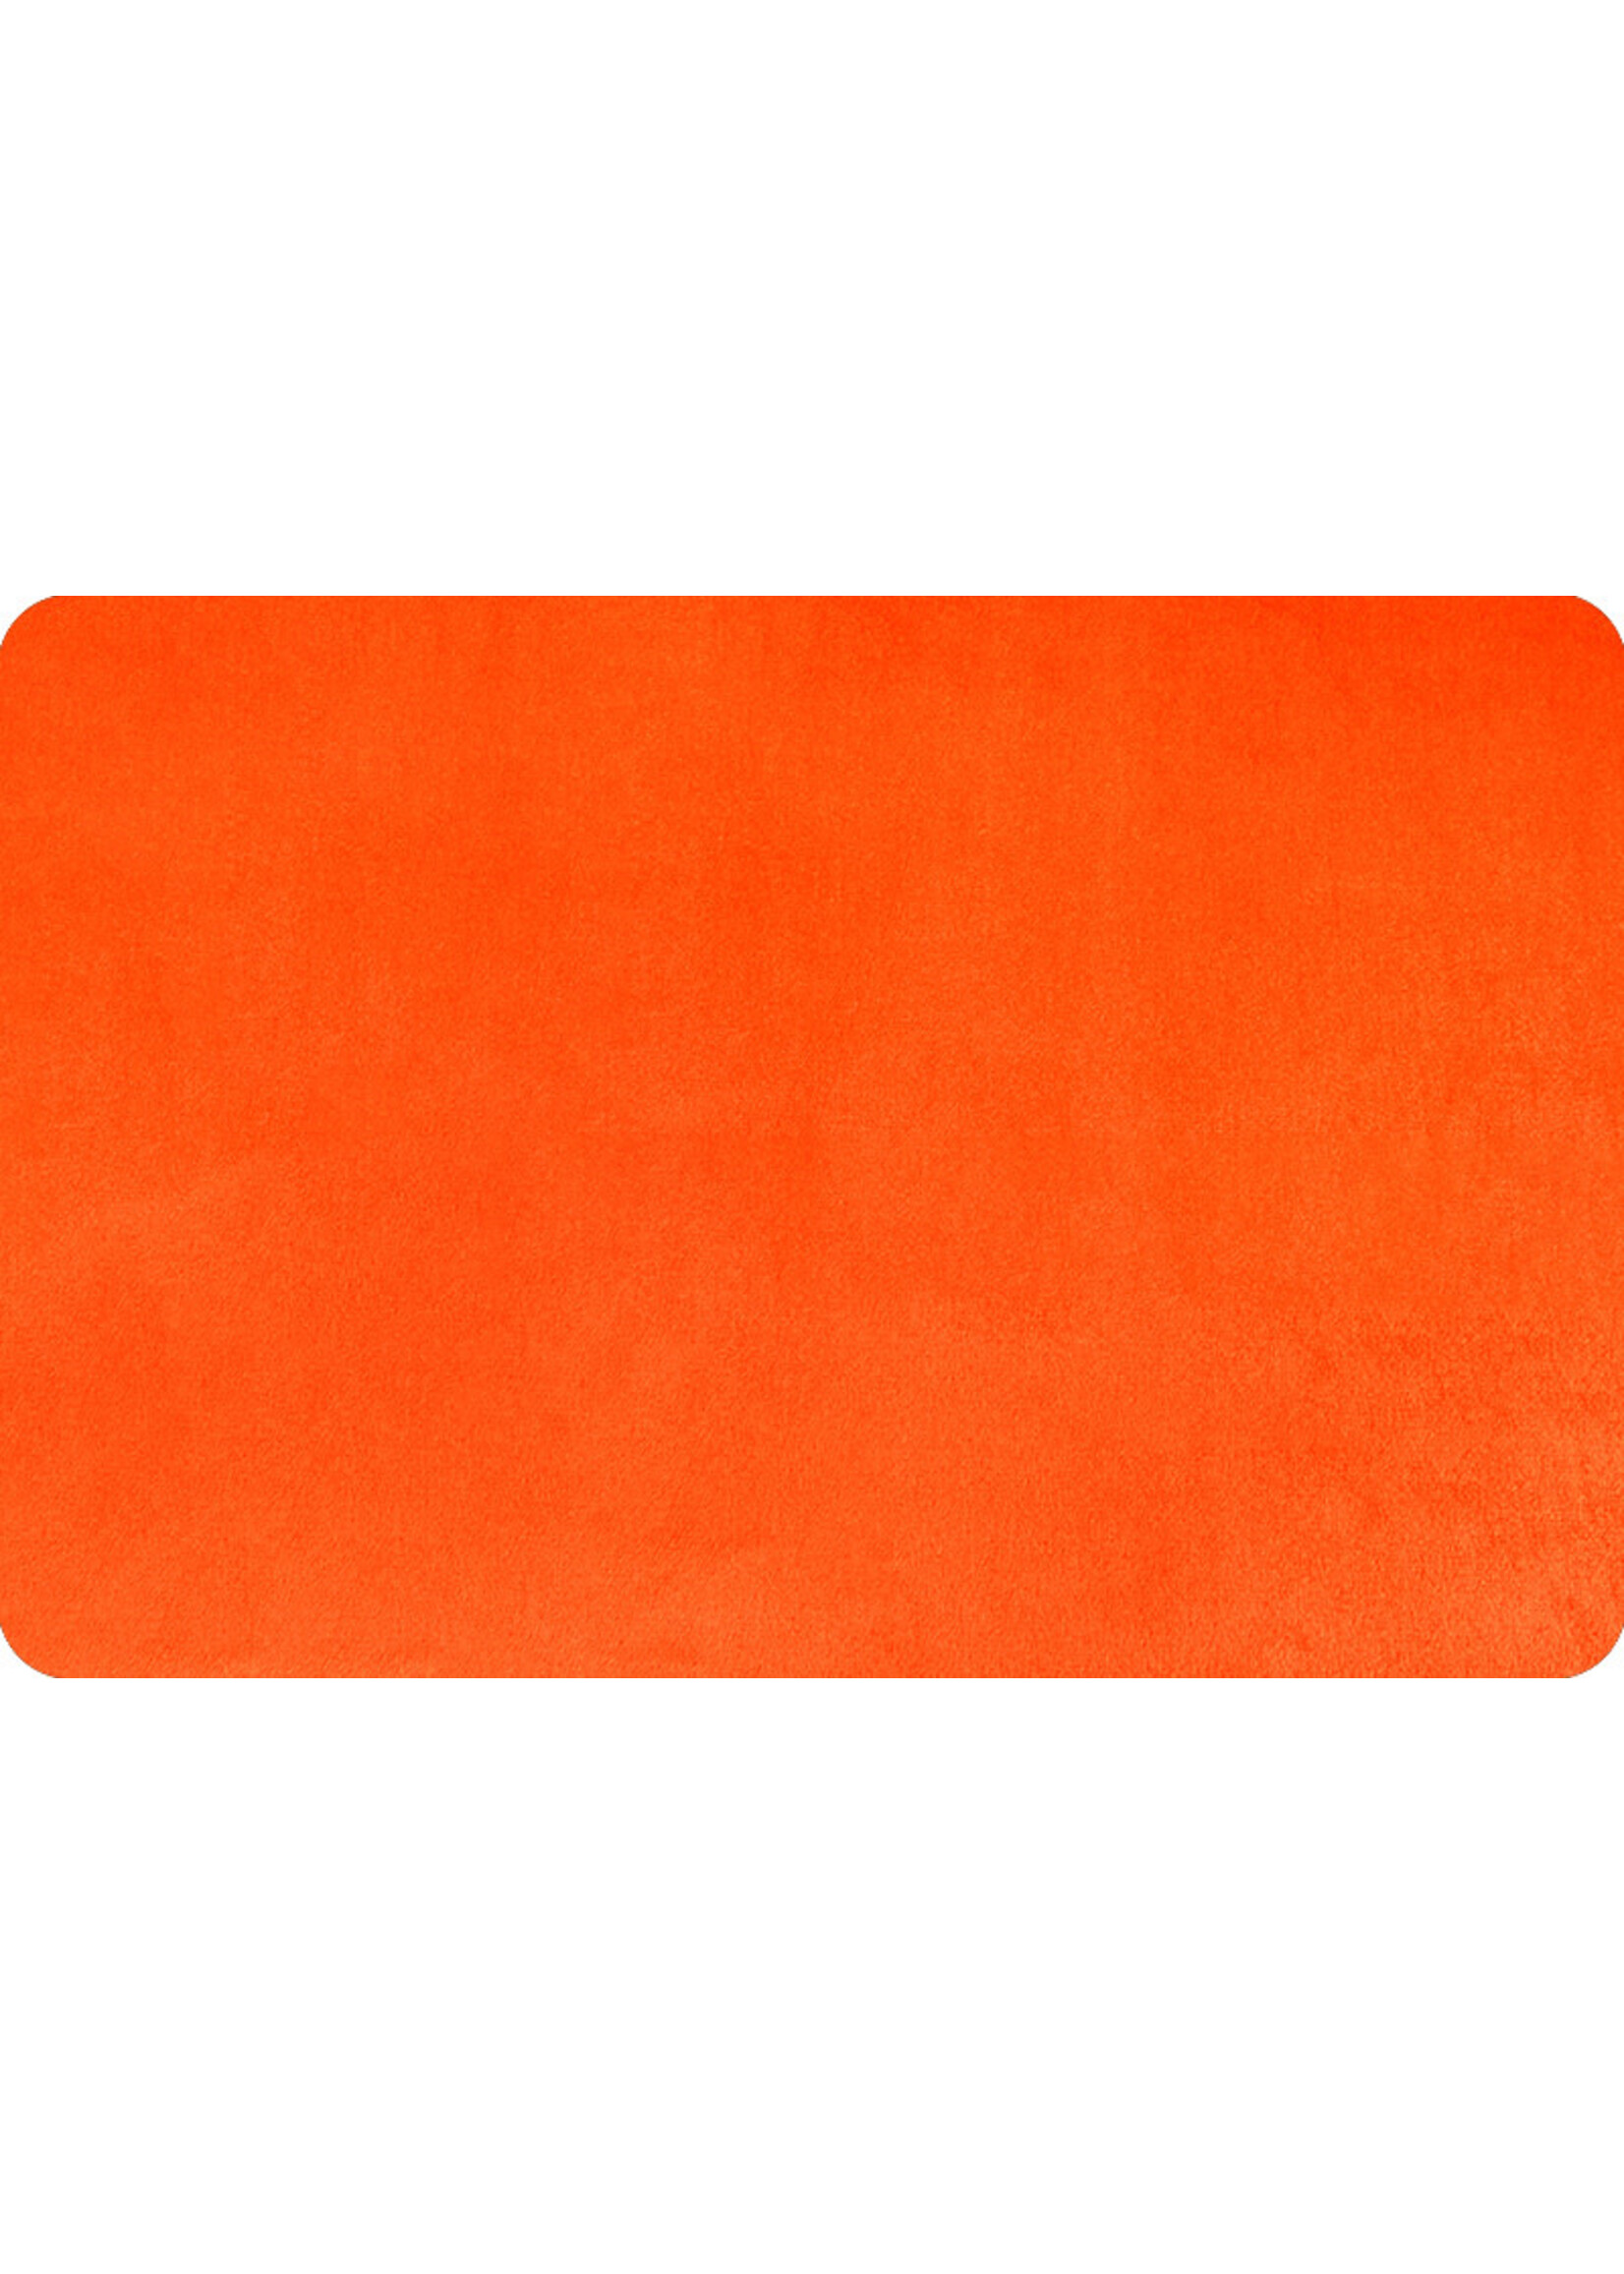 Shannon Fabrics Minky, Extra Wide Solid Cuddle3, 90" Mandarin, (by the inch)